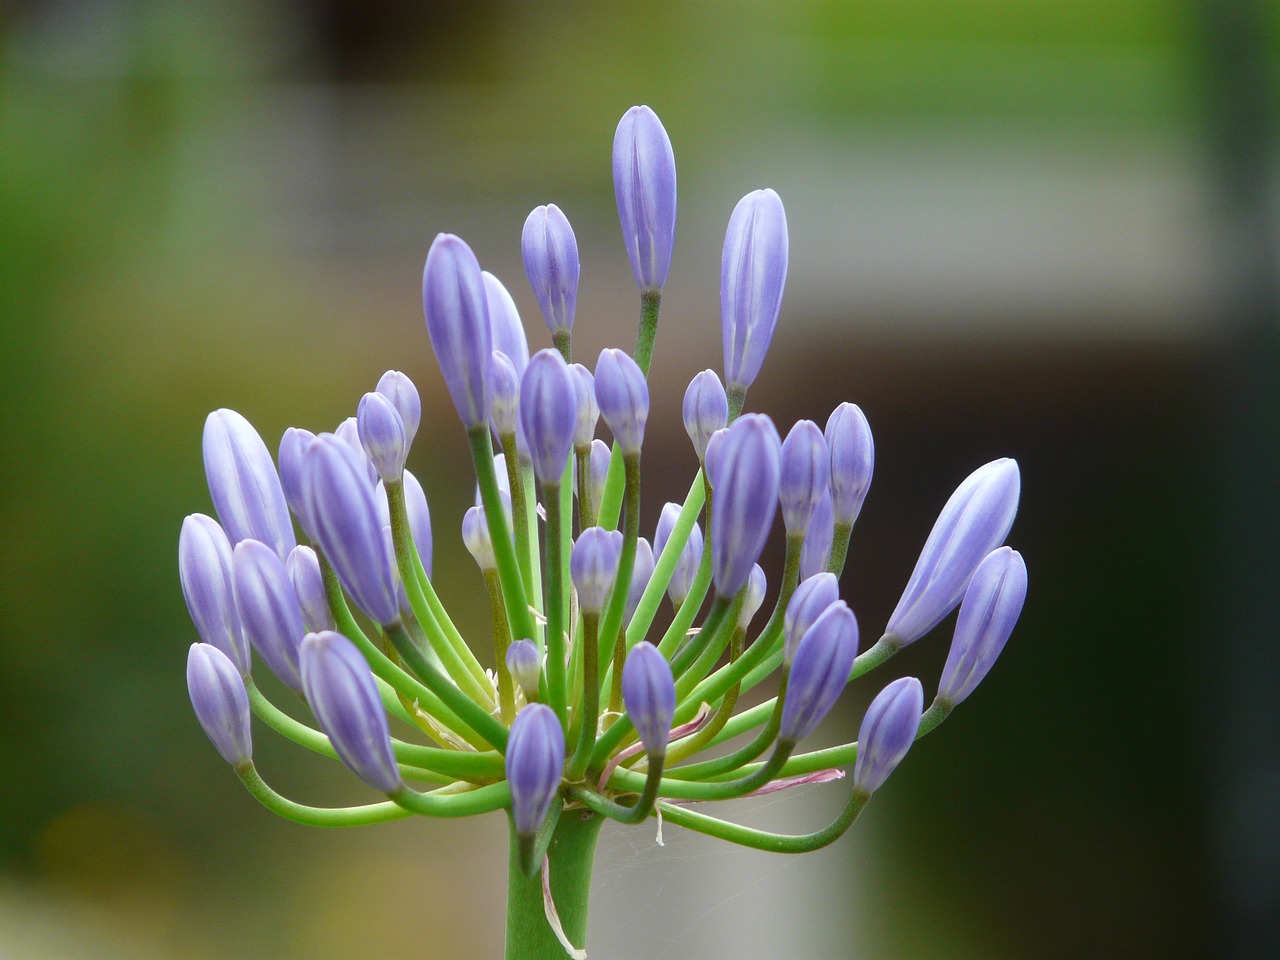 agapanthus,jewelry lilies greenhouse,agapanthoideae,lily,blue,ornamental plant,love flower,agapanthus africanus,inflorescence,free pictures, free photos, free images, royalty free, free illustrations, public domain